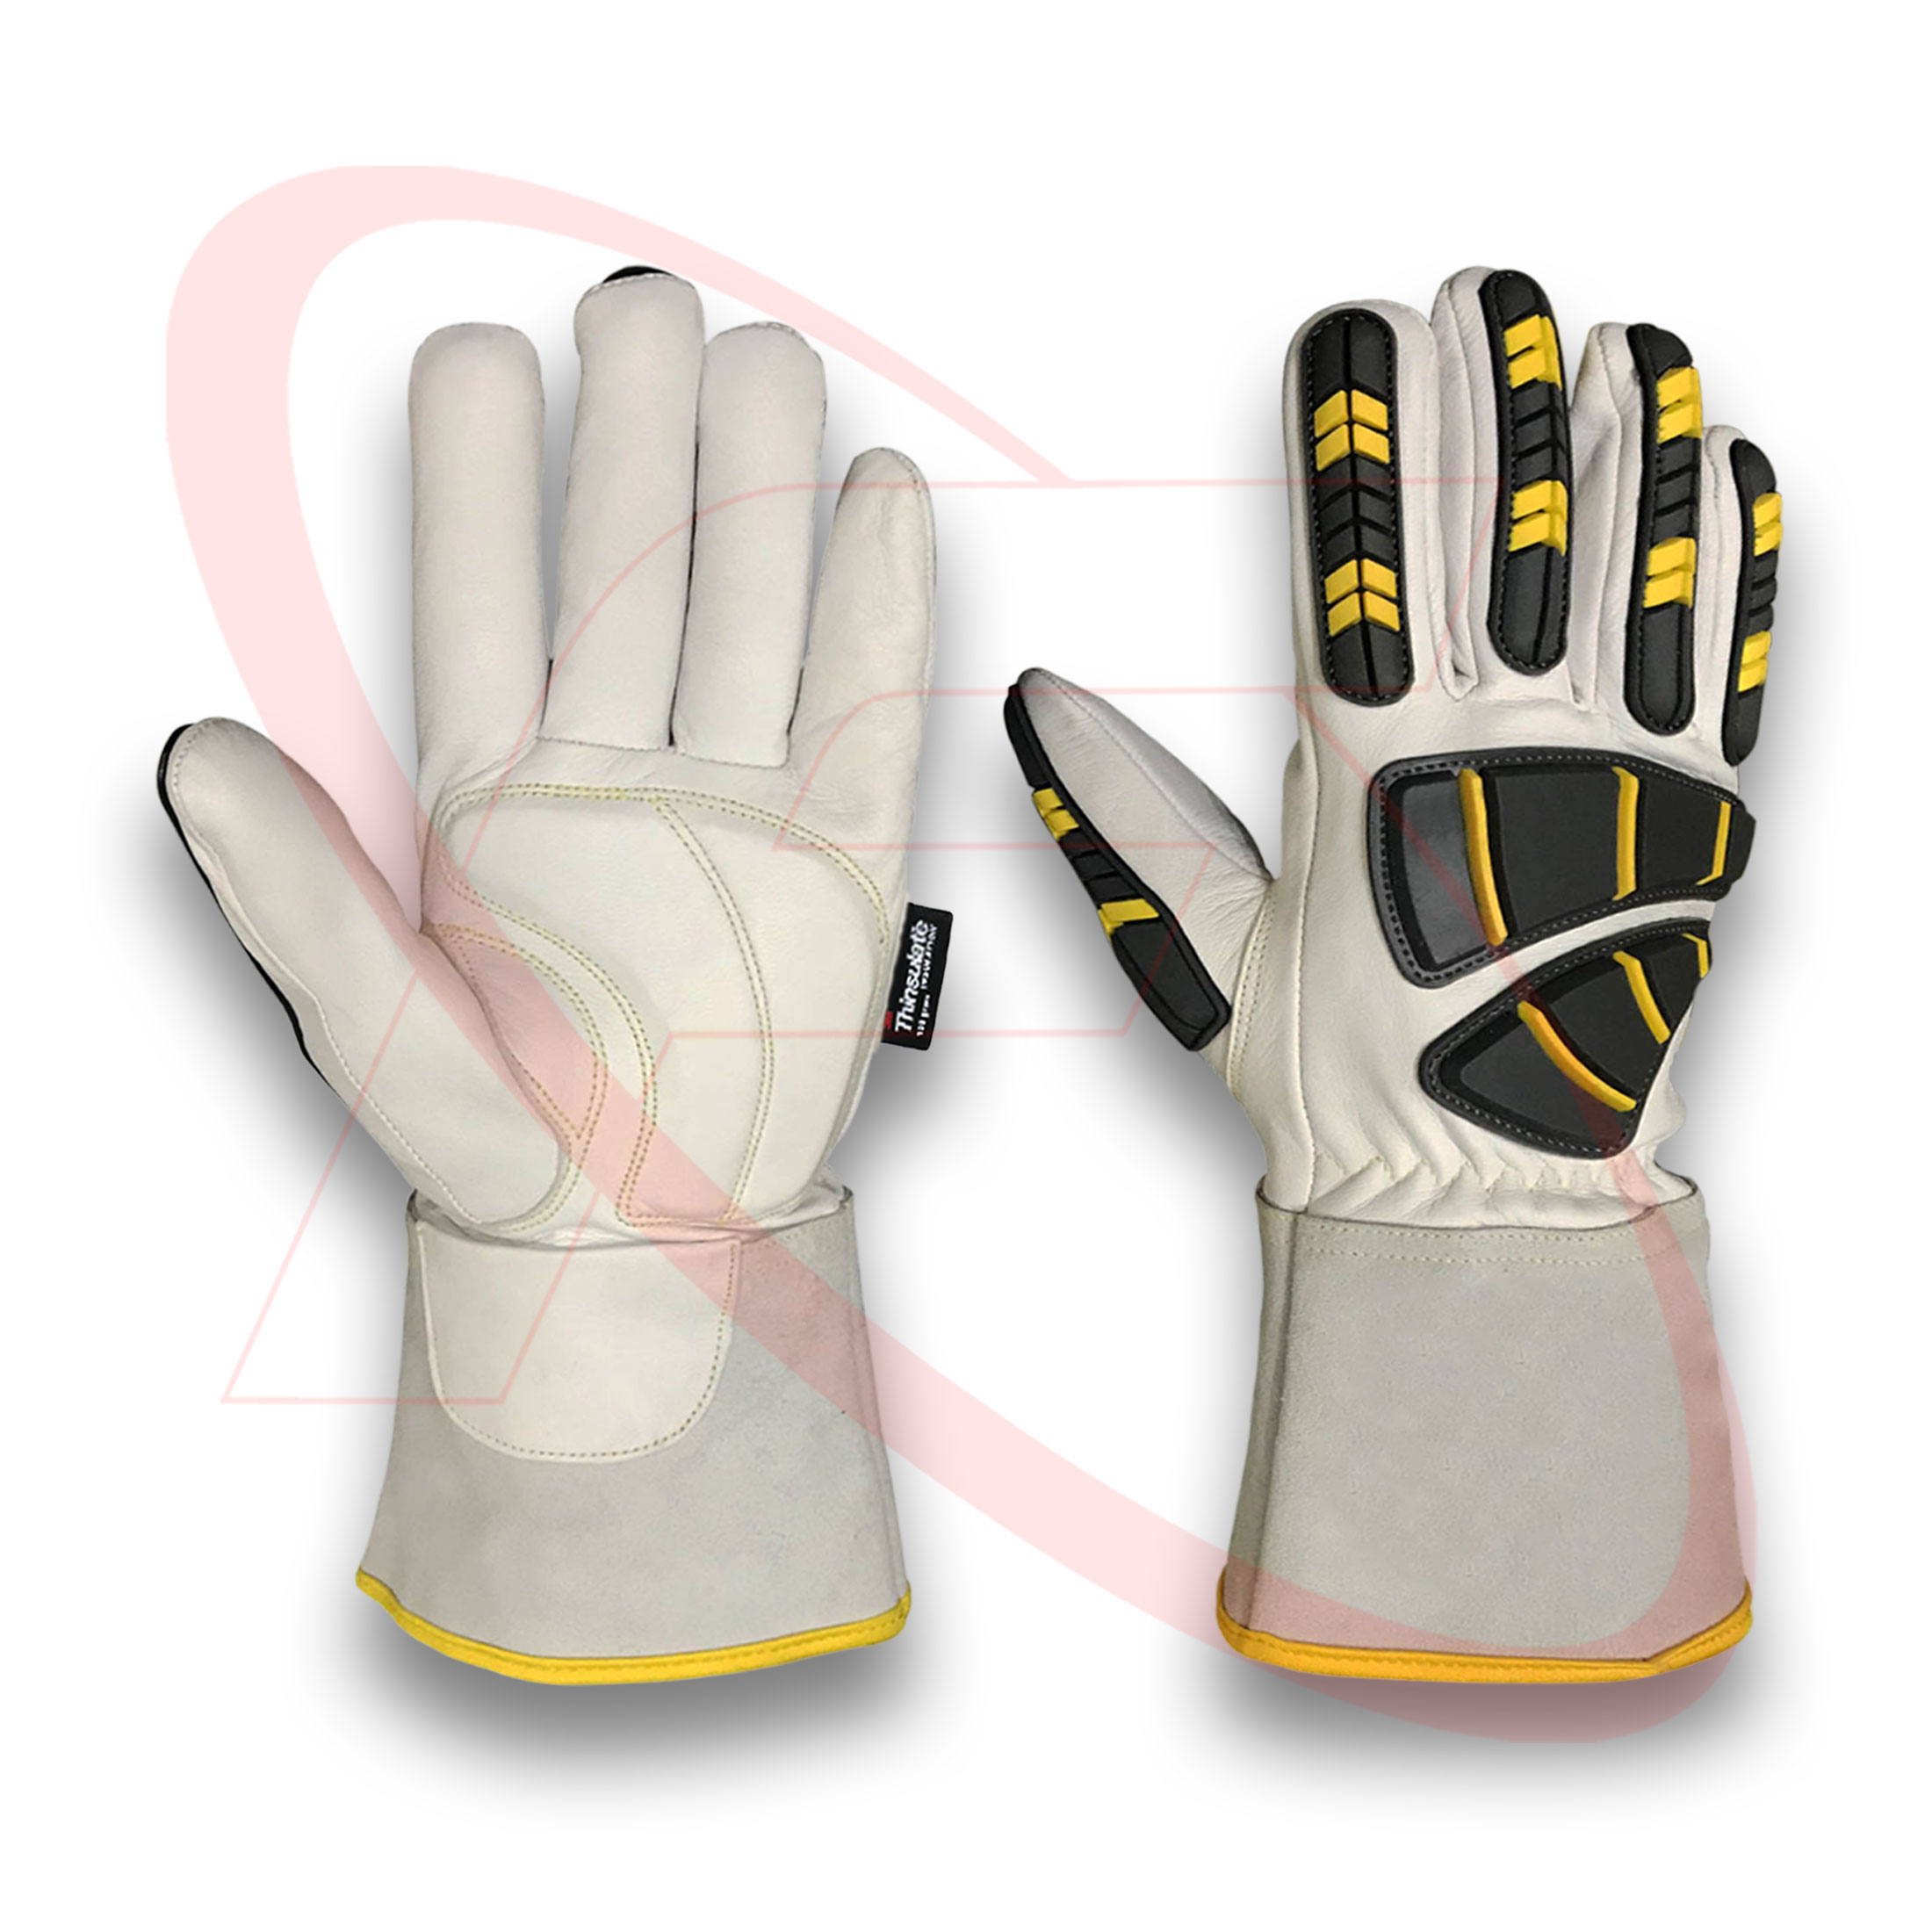 Impact Protective Gloves Cut Resistant Anti-Impact Gloves Goatskin Leather Winter Driver Gloves